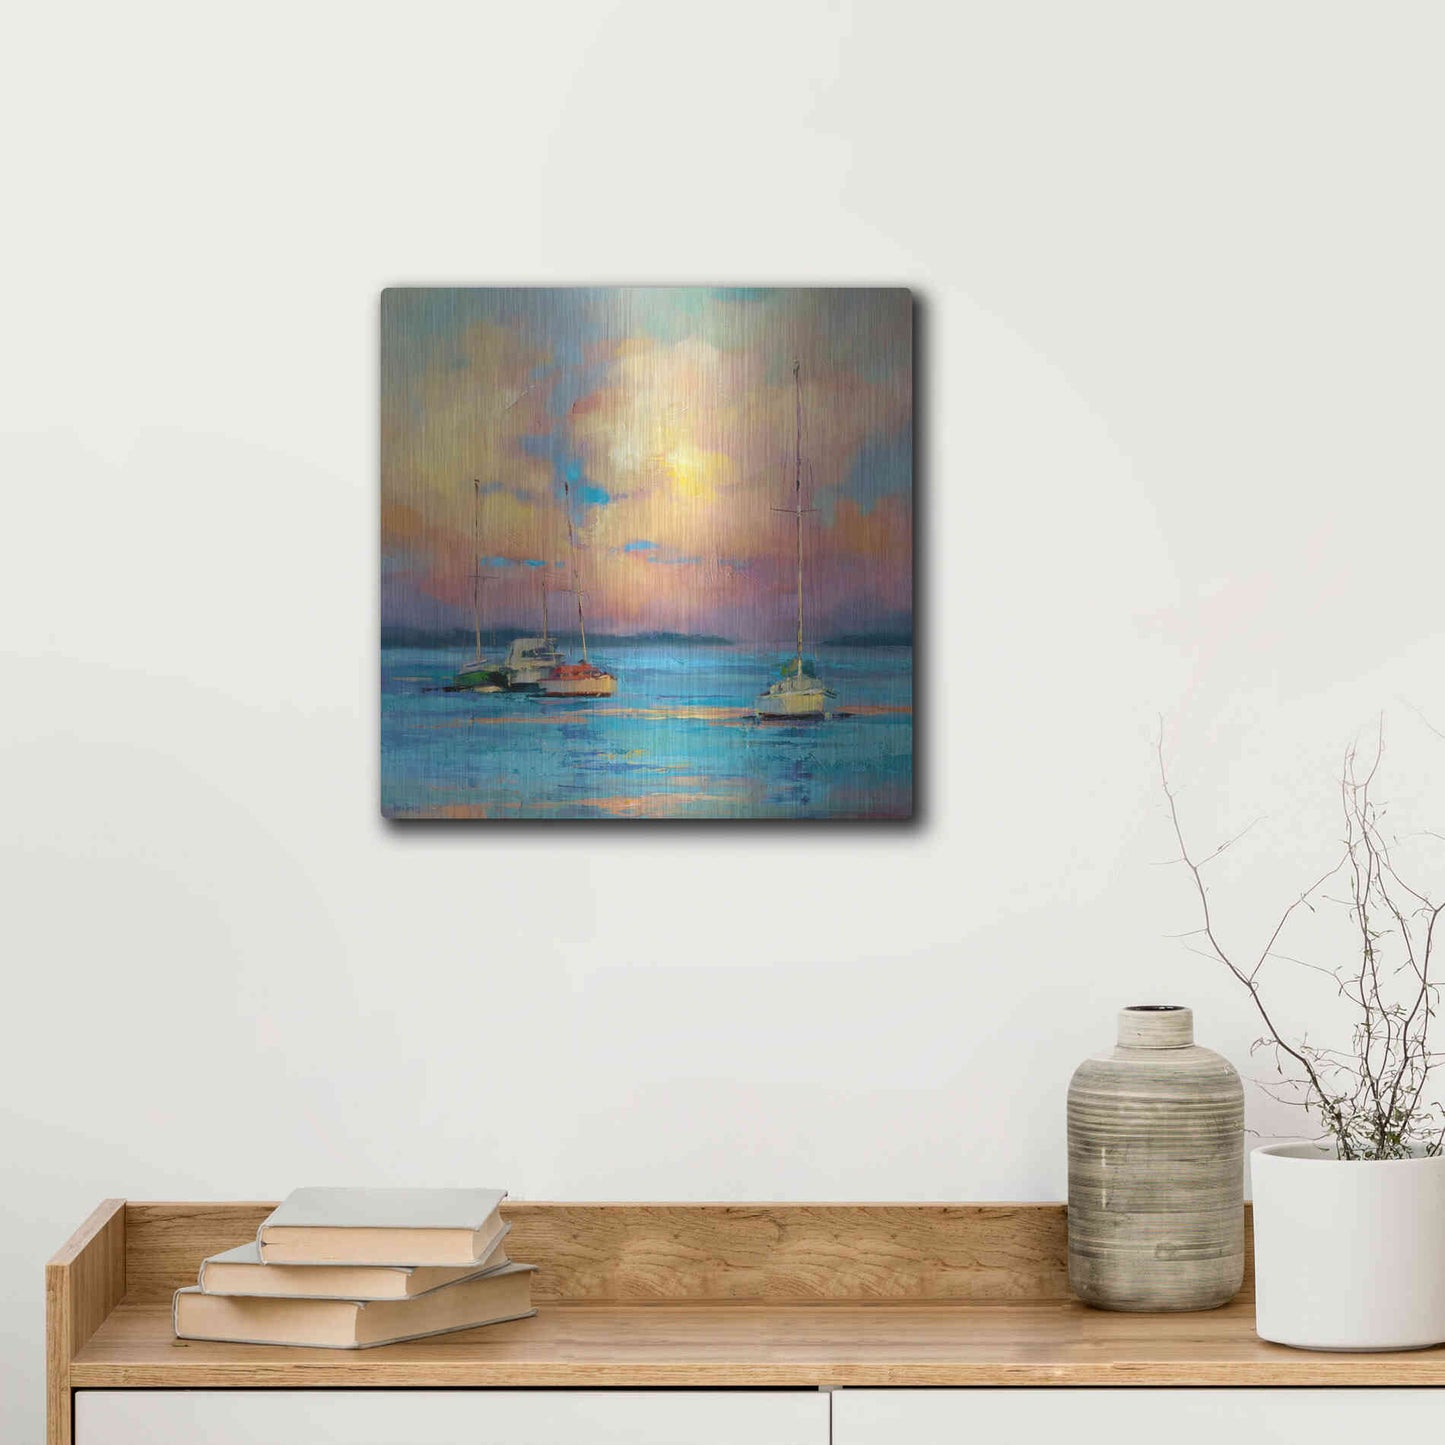 Luxe Metal Art 'After The Sailing Day' by Kasia Bruniany Metal Wall Art,12x12